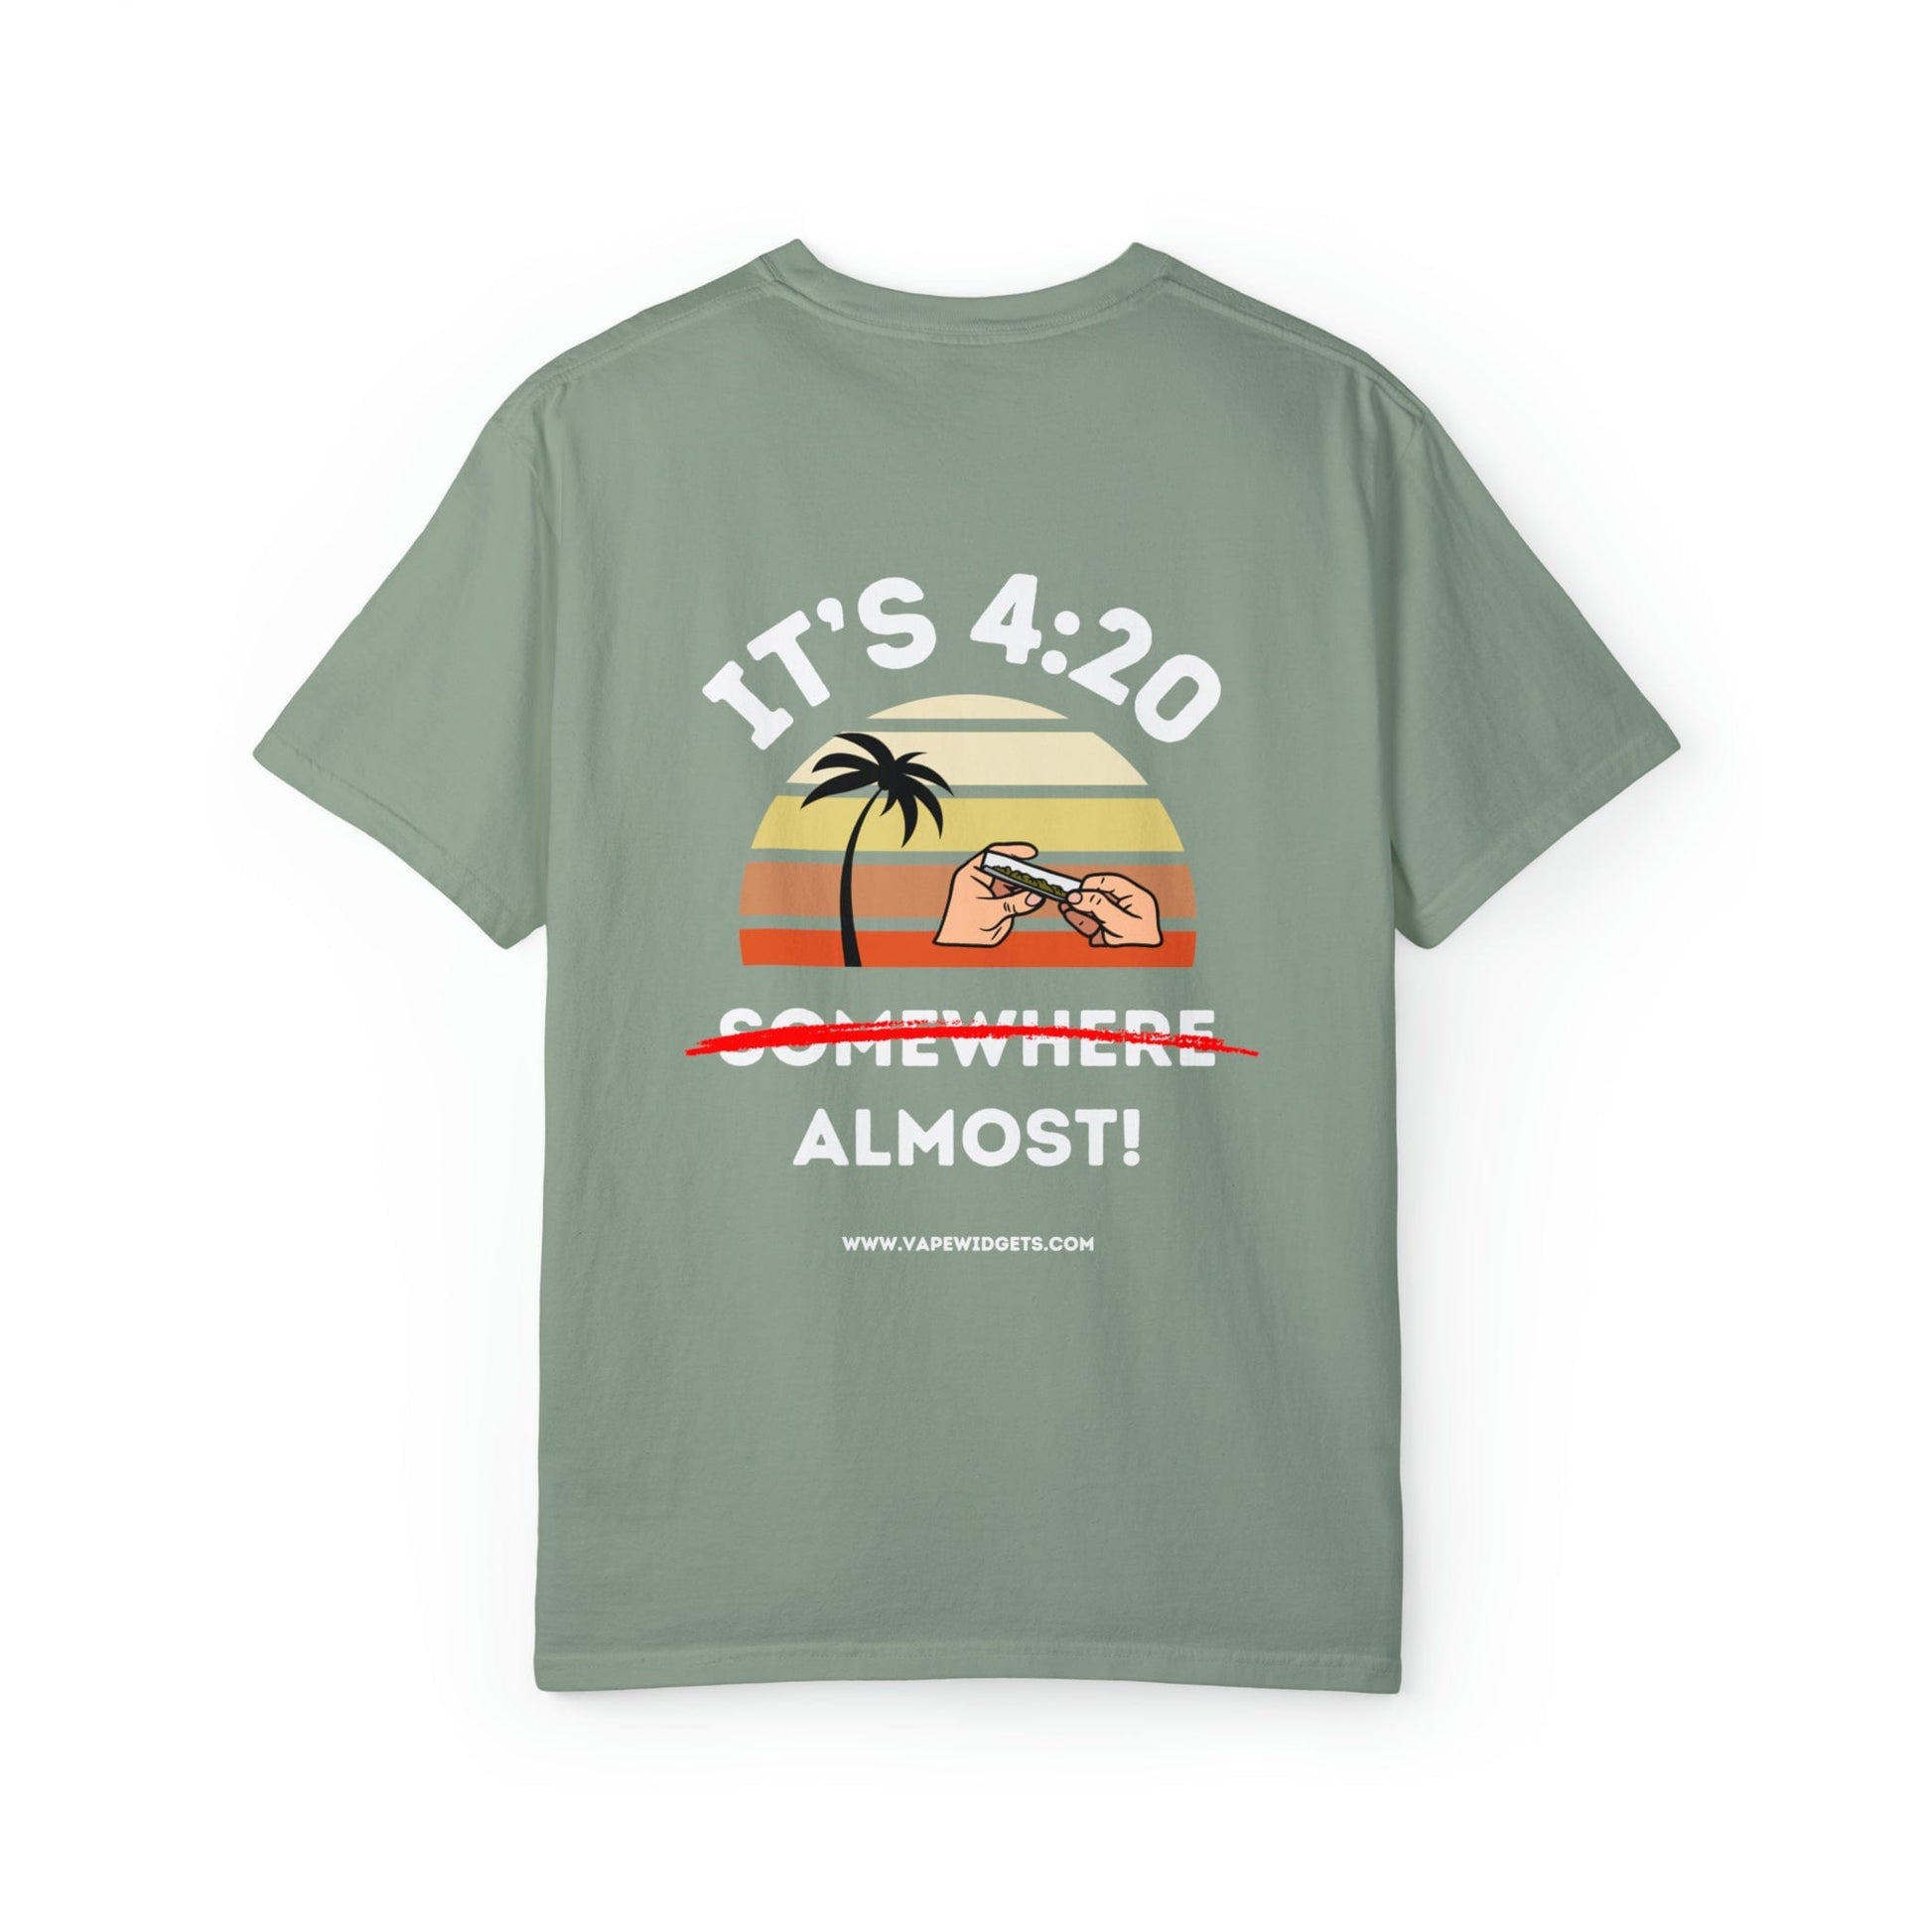 Bay / S It's 4:20 Somewhere, Almost! - T-Shirt - Comfort Colors